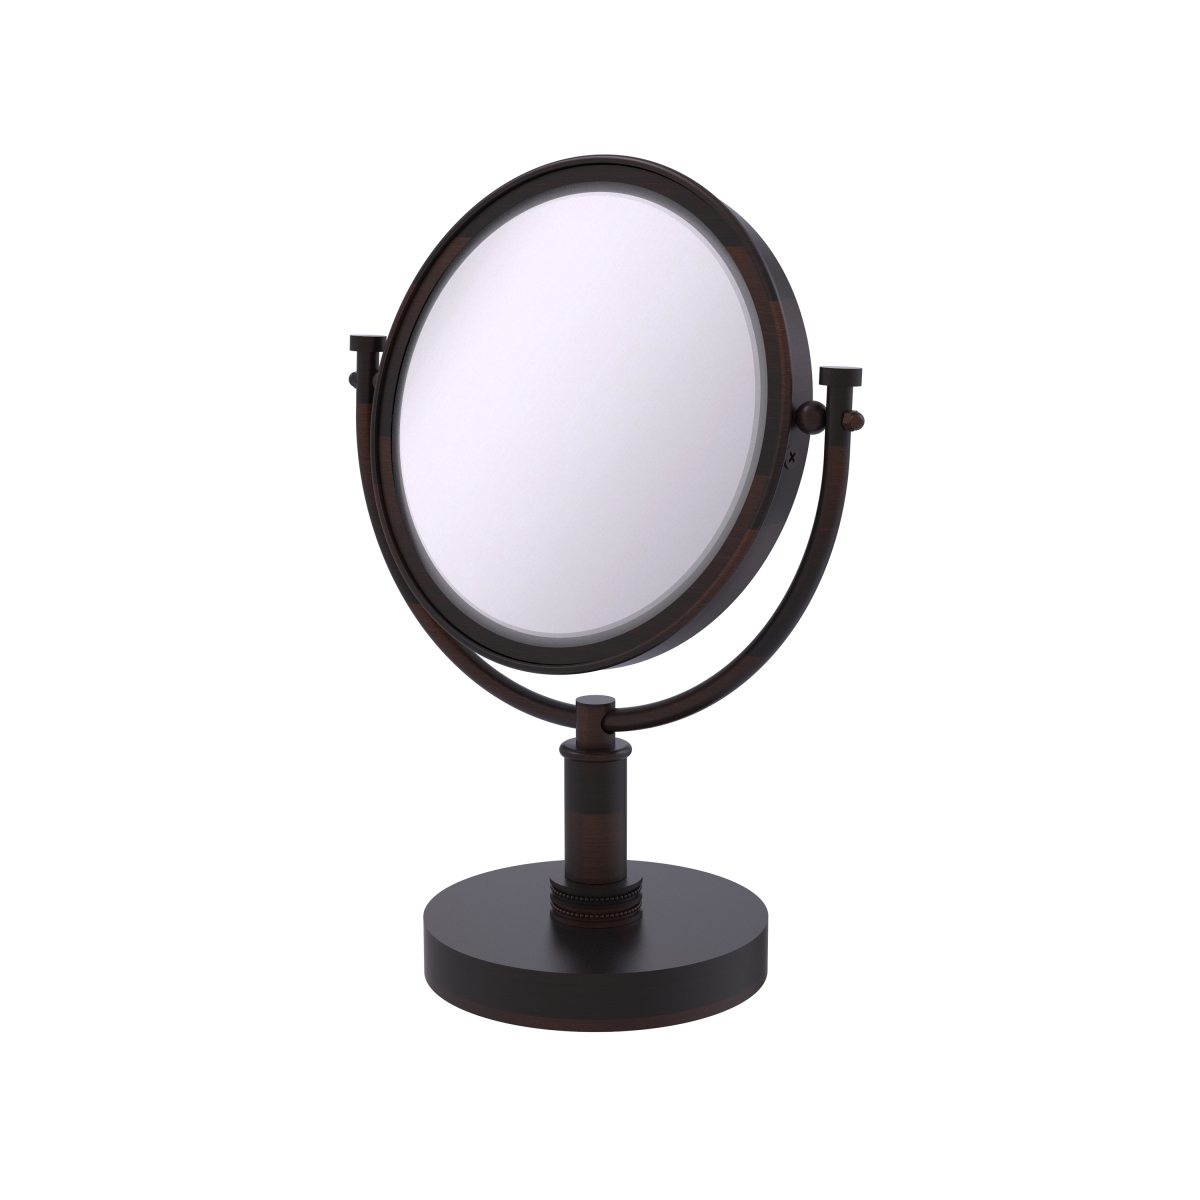 Picture of Allied Brass DM-4D-5X-VB 8 in. Vanity Top Make-Up Mirror 5X Magnification, Venetian Bronze - 15 x 8 x 8 in.